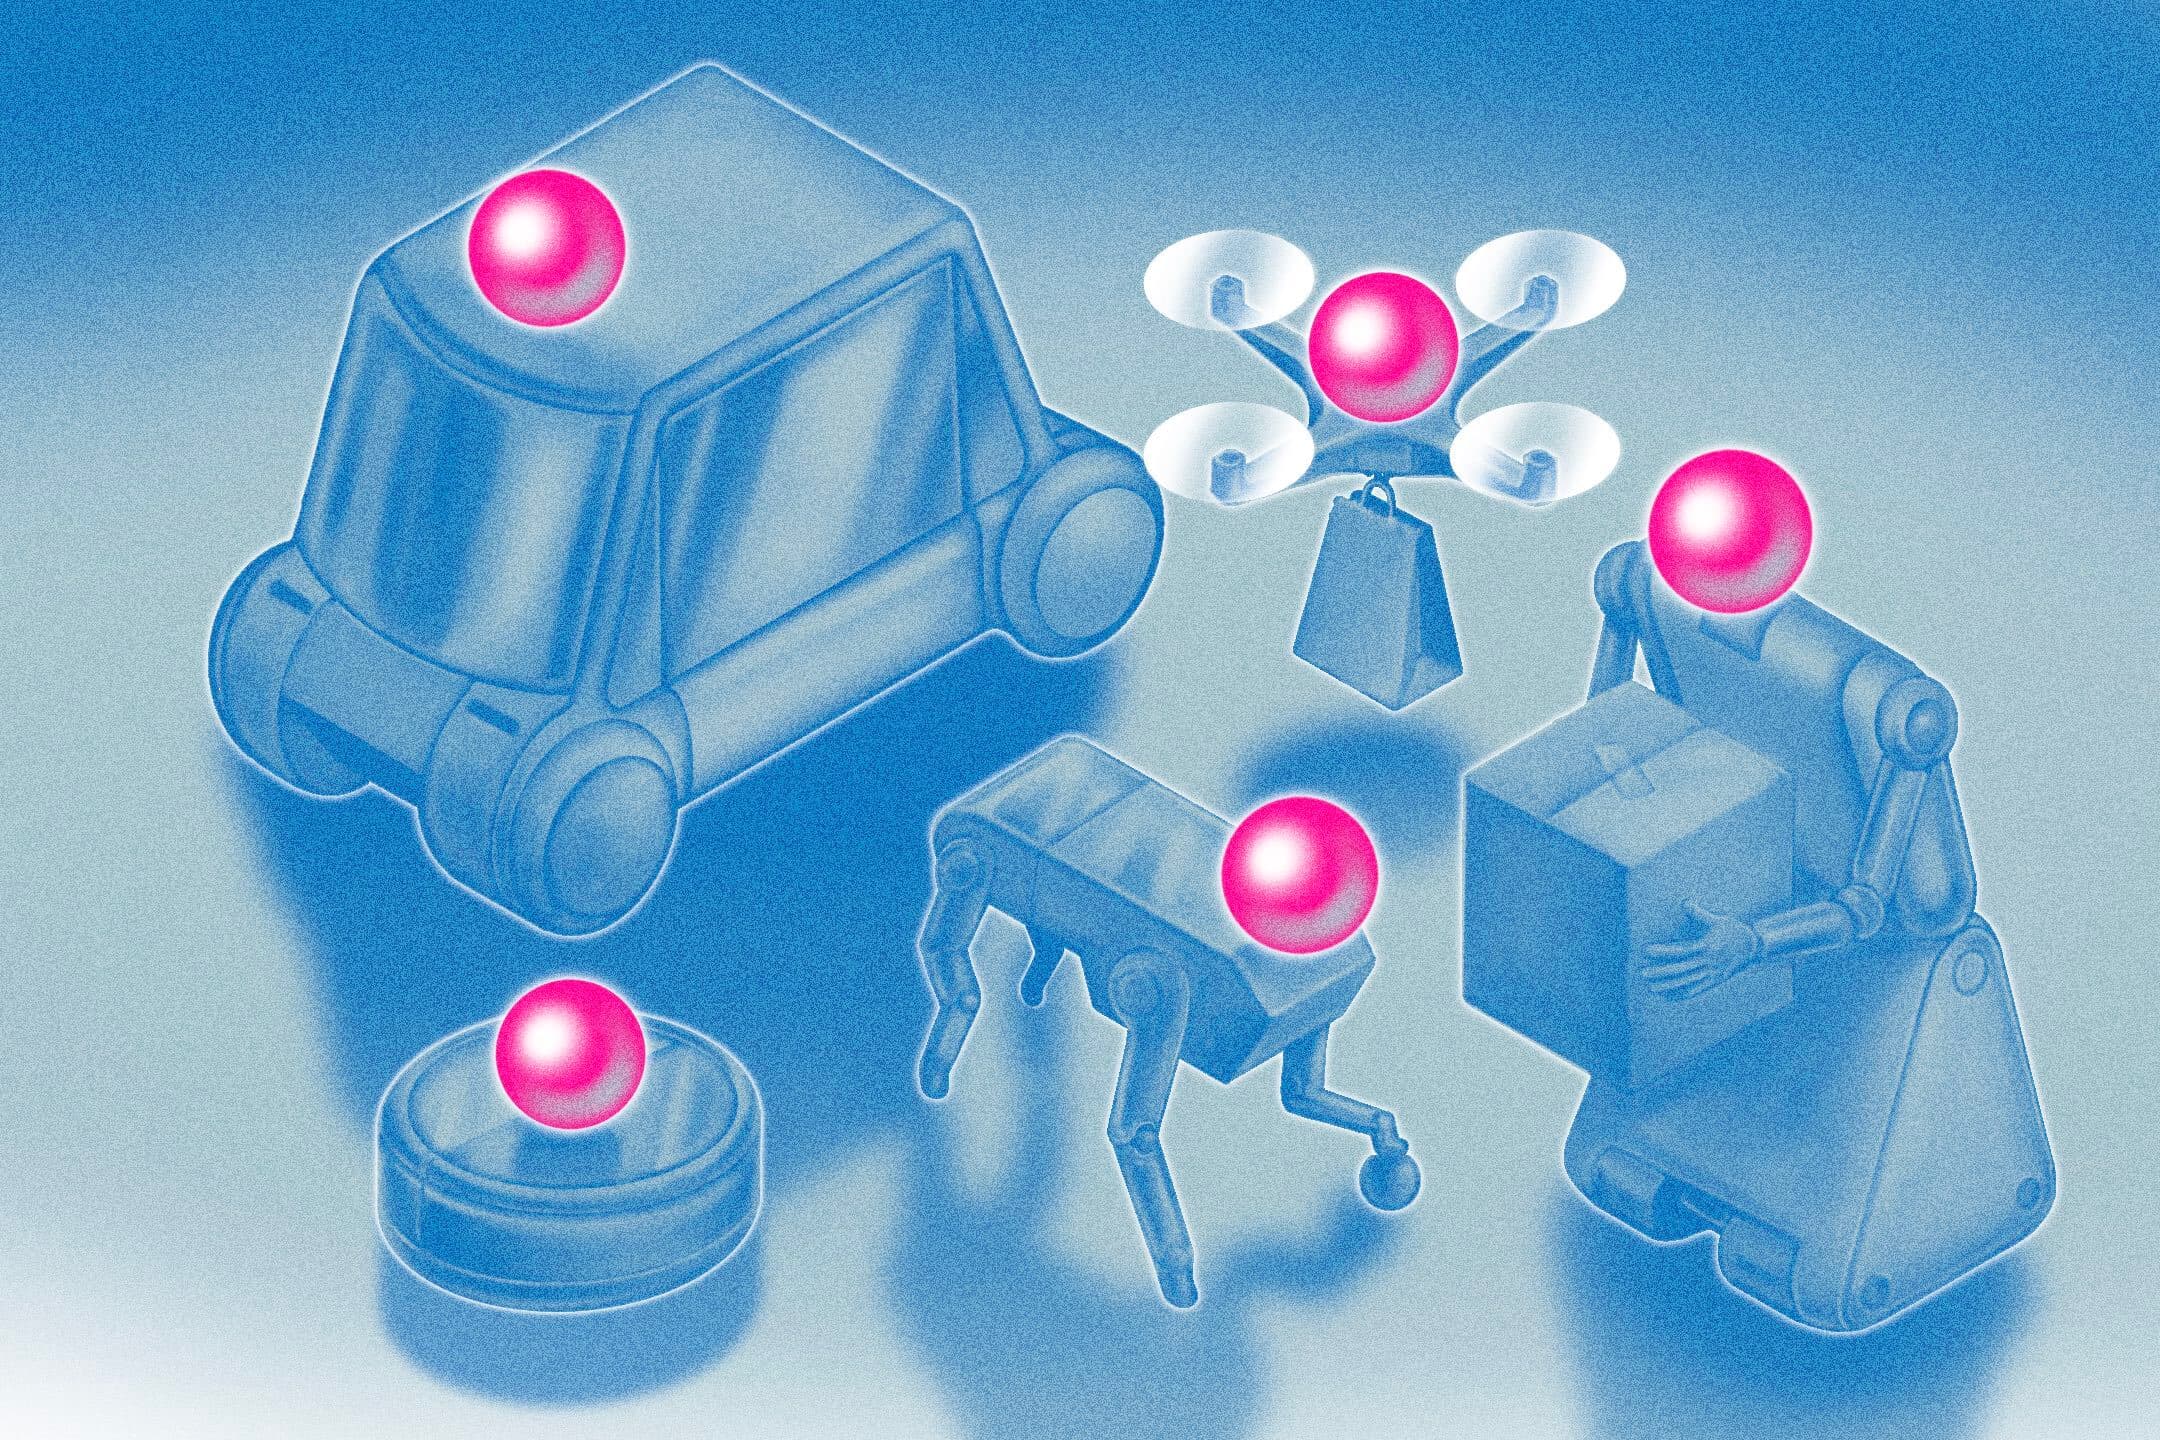 An assortment of artificial intelligence robots are collected in a group, with glowing orbs representing their intelligence and ways of communicating with humans.